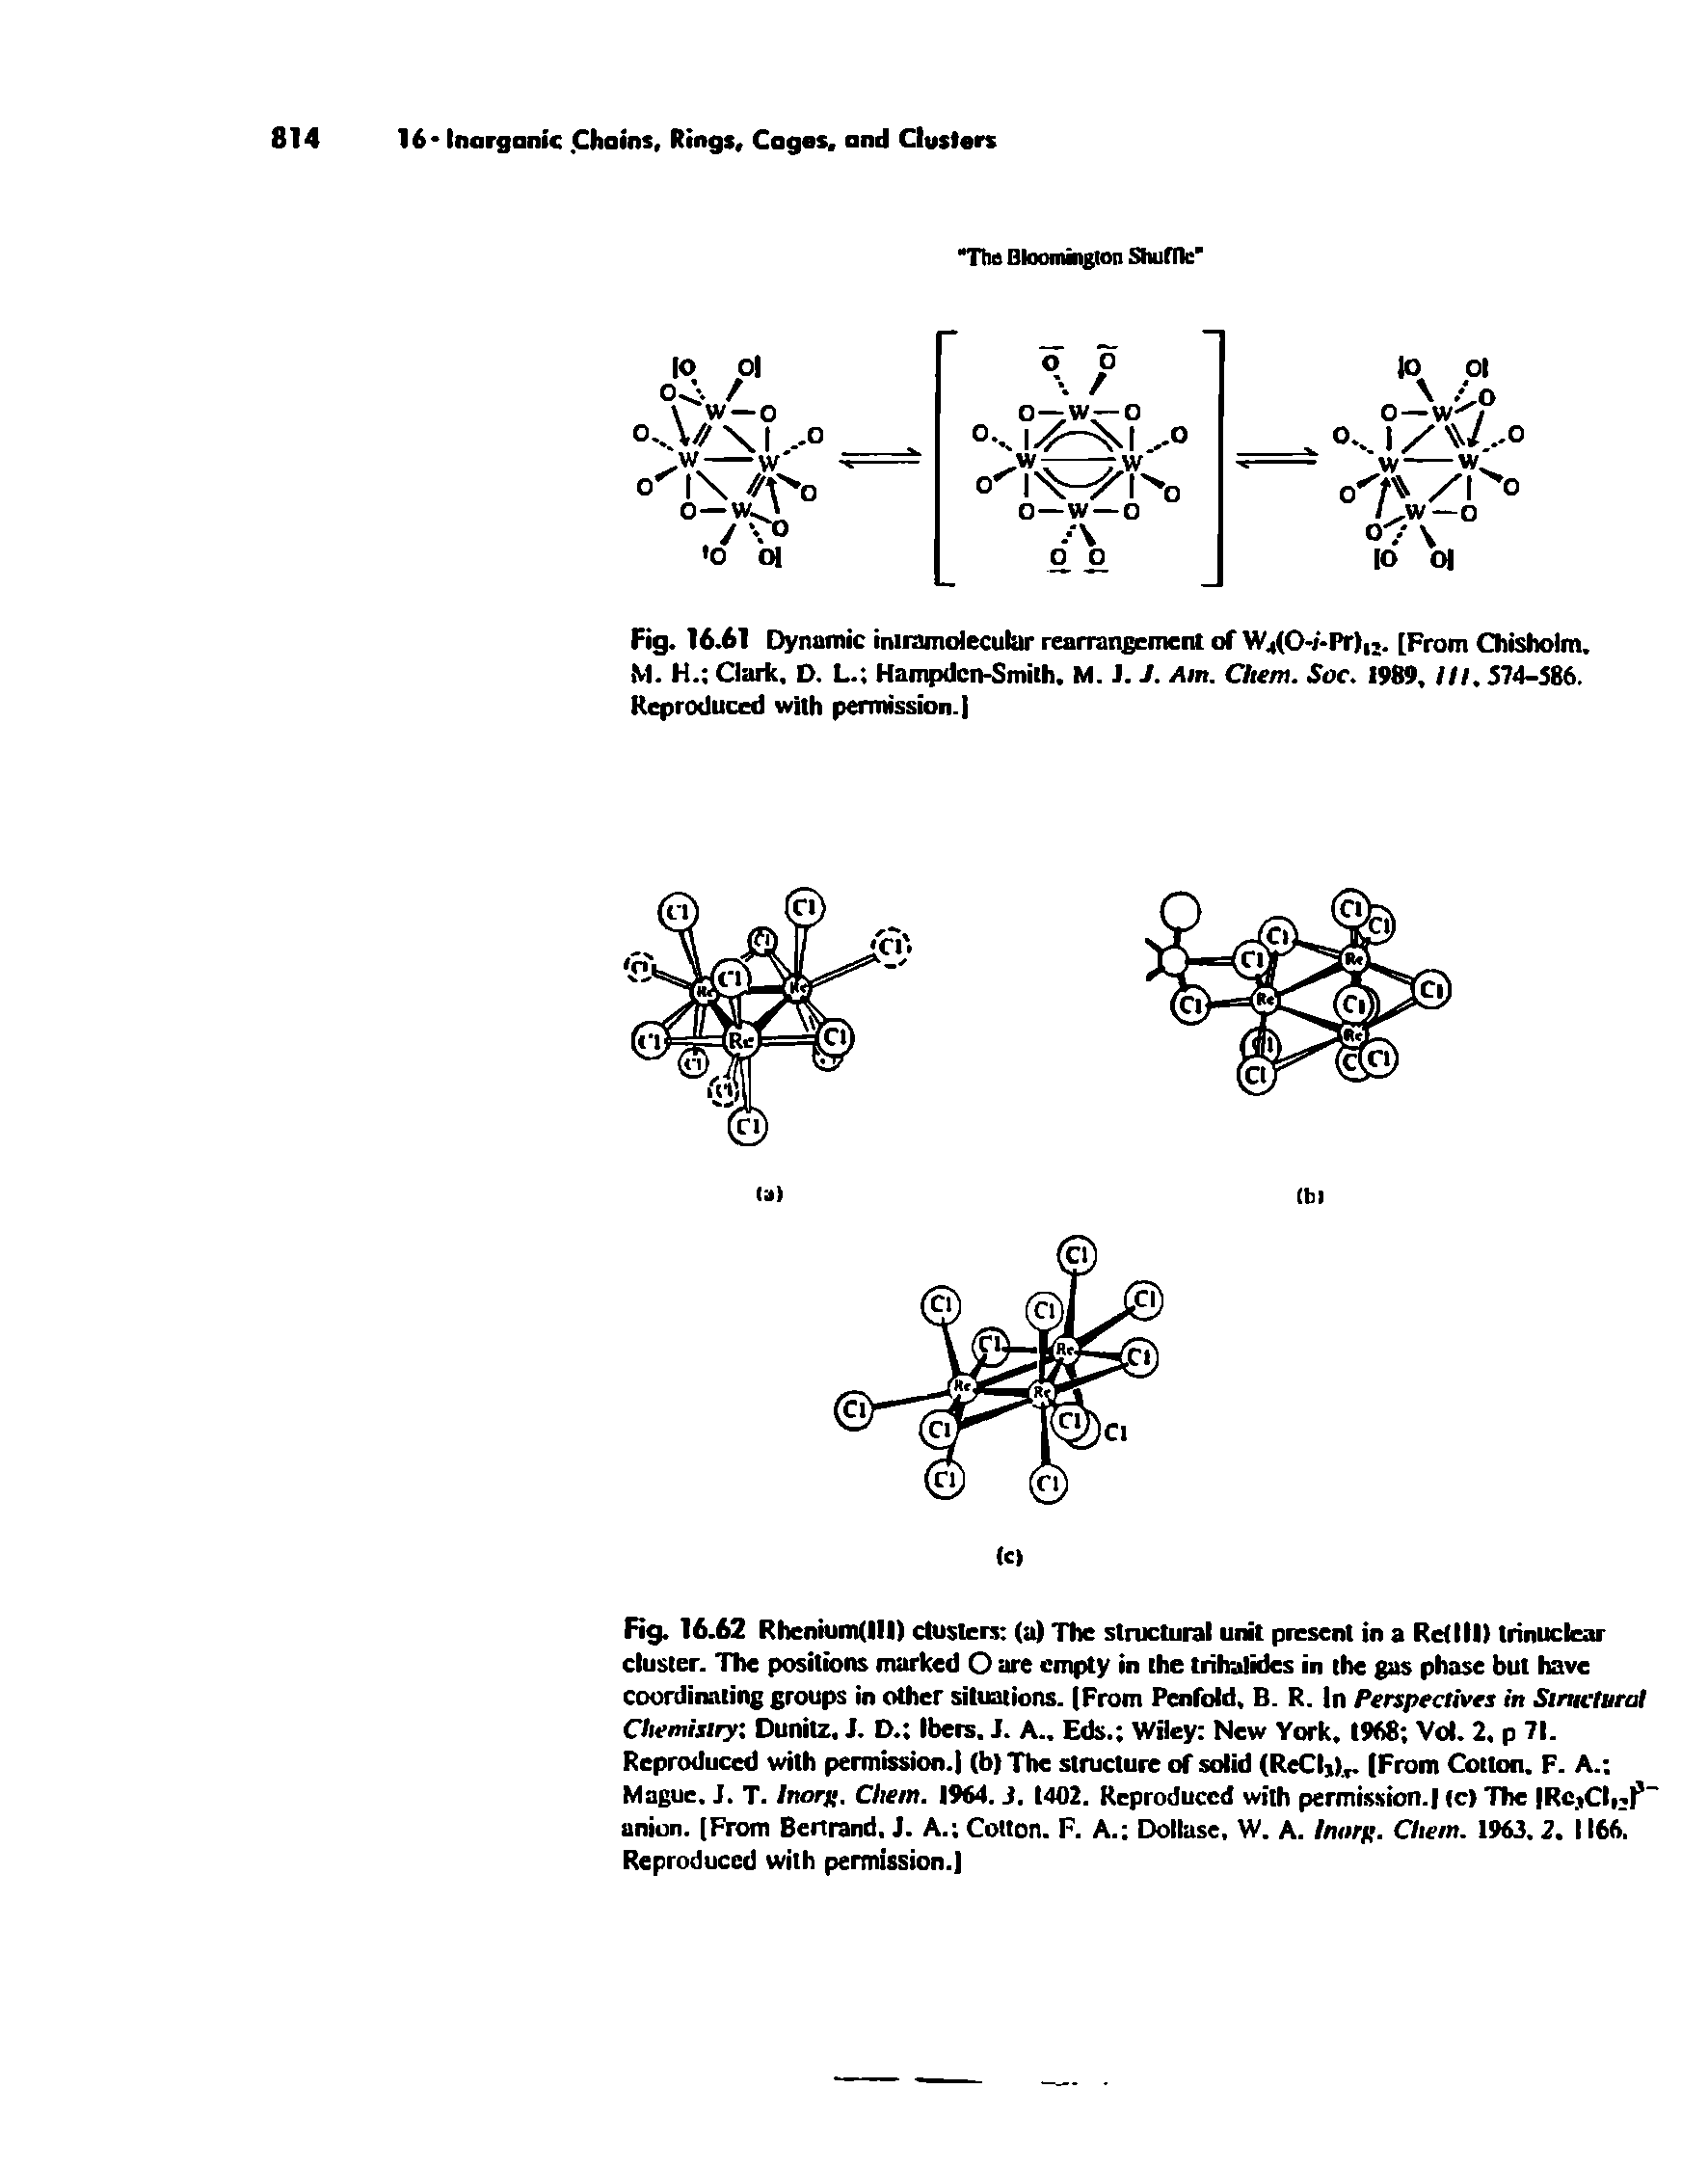 Fig. 16.62 Rhenium(l l) dusters (a) The structural unit present in a Refill) trinuclcar cluster. The positions marked O are empty in the trihalidcs in the gas phase but have coordinating groups in other situations. (From Penfold, B. R. In Perspectives in Structural Chemistry Dunitz, J. D. Ibers. J. A.. Eds. Wiley New York, 1968 Vol. 2, p 71. Reproduced with permission.) (b) The structure of solid (ReCI ). (From Cotton. F. A. Mague. J. T. Inorp. Chem. 1964. J. 1402. Reproduced with permission. (c) The JRcjCI P-anion. [From Bertrand, J. A. Cotton. F. A. Dollase, W. A. inarp. Chem. 1963. 2. 1166. Reproduced with permission.)...